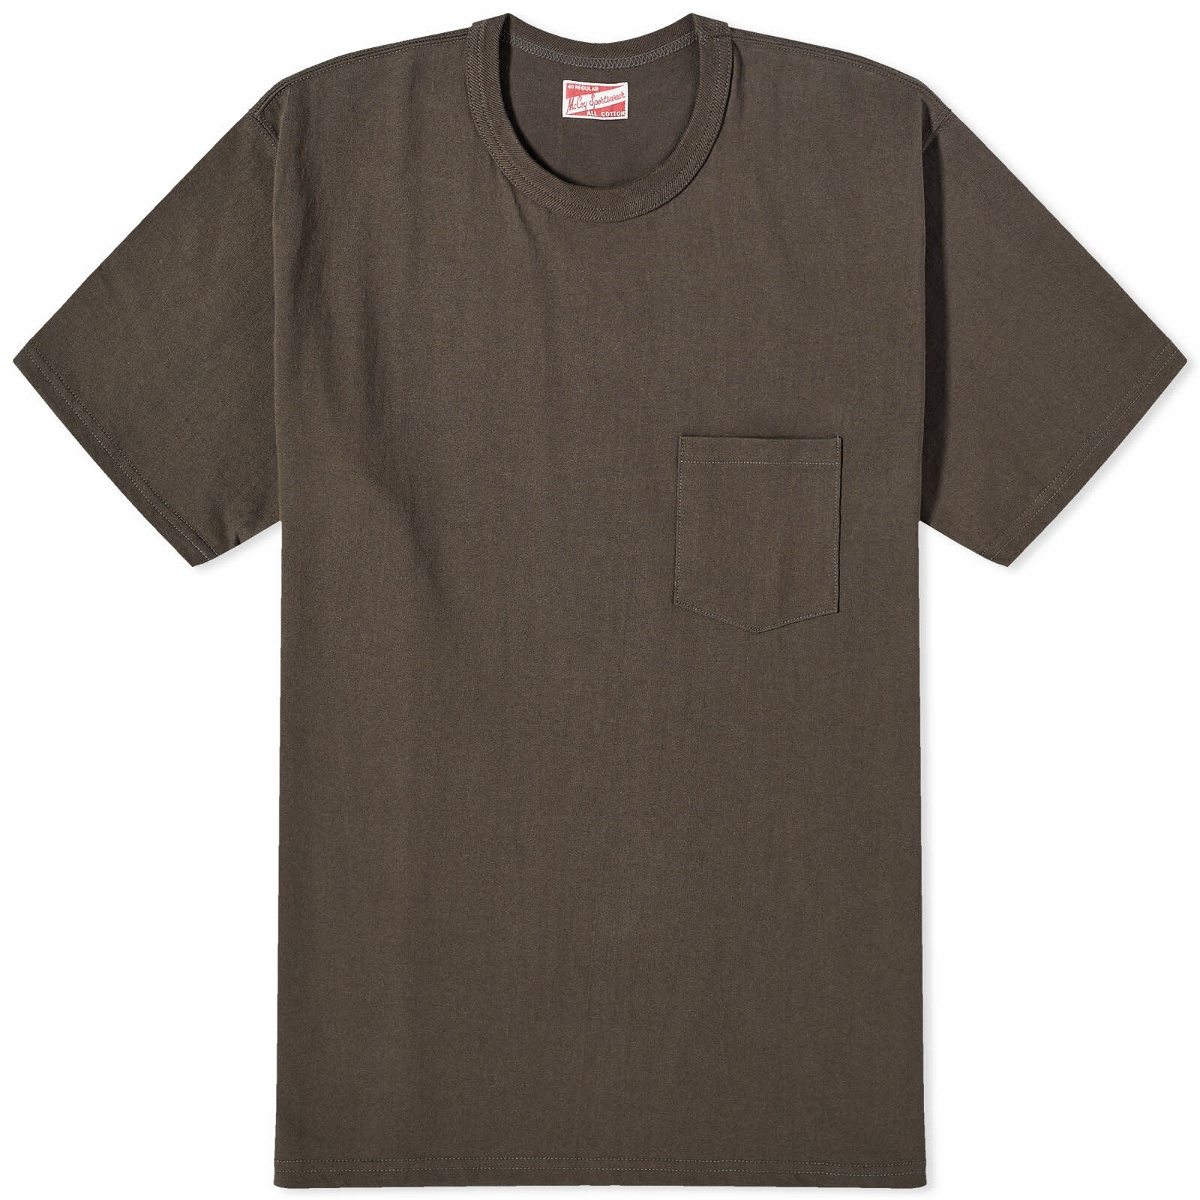 Photo: The Real McCoy's Men's The Real McCoys Joe McCoy Pocket T-Shirt in Chale